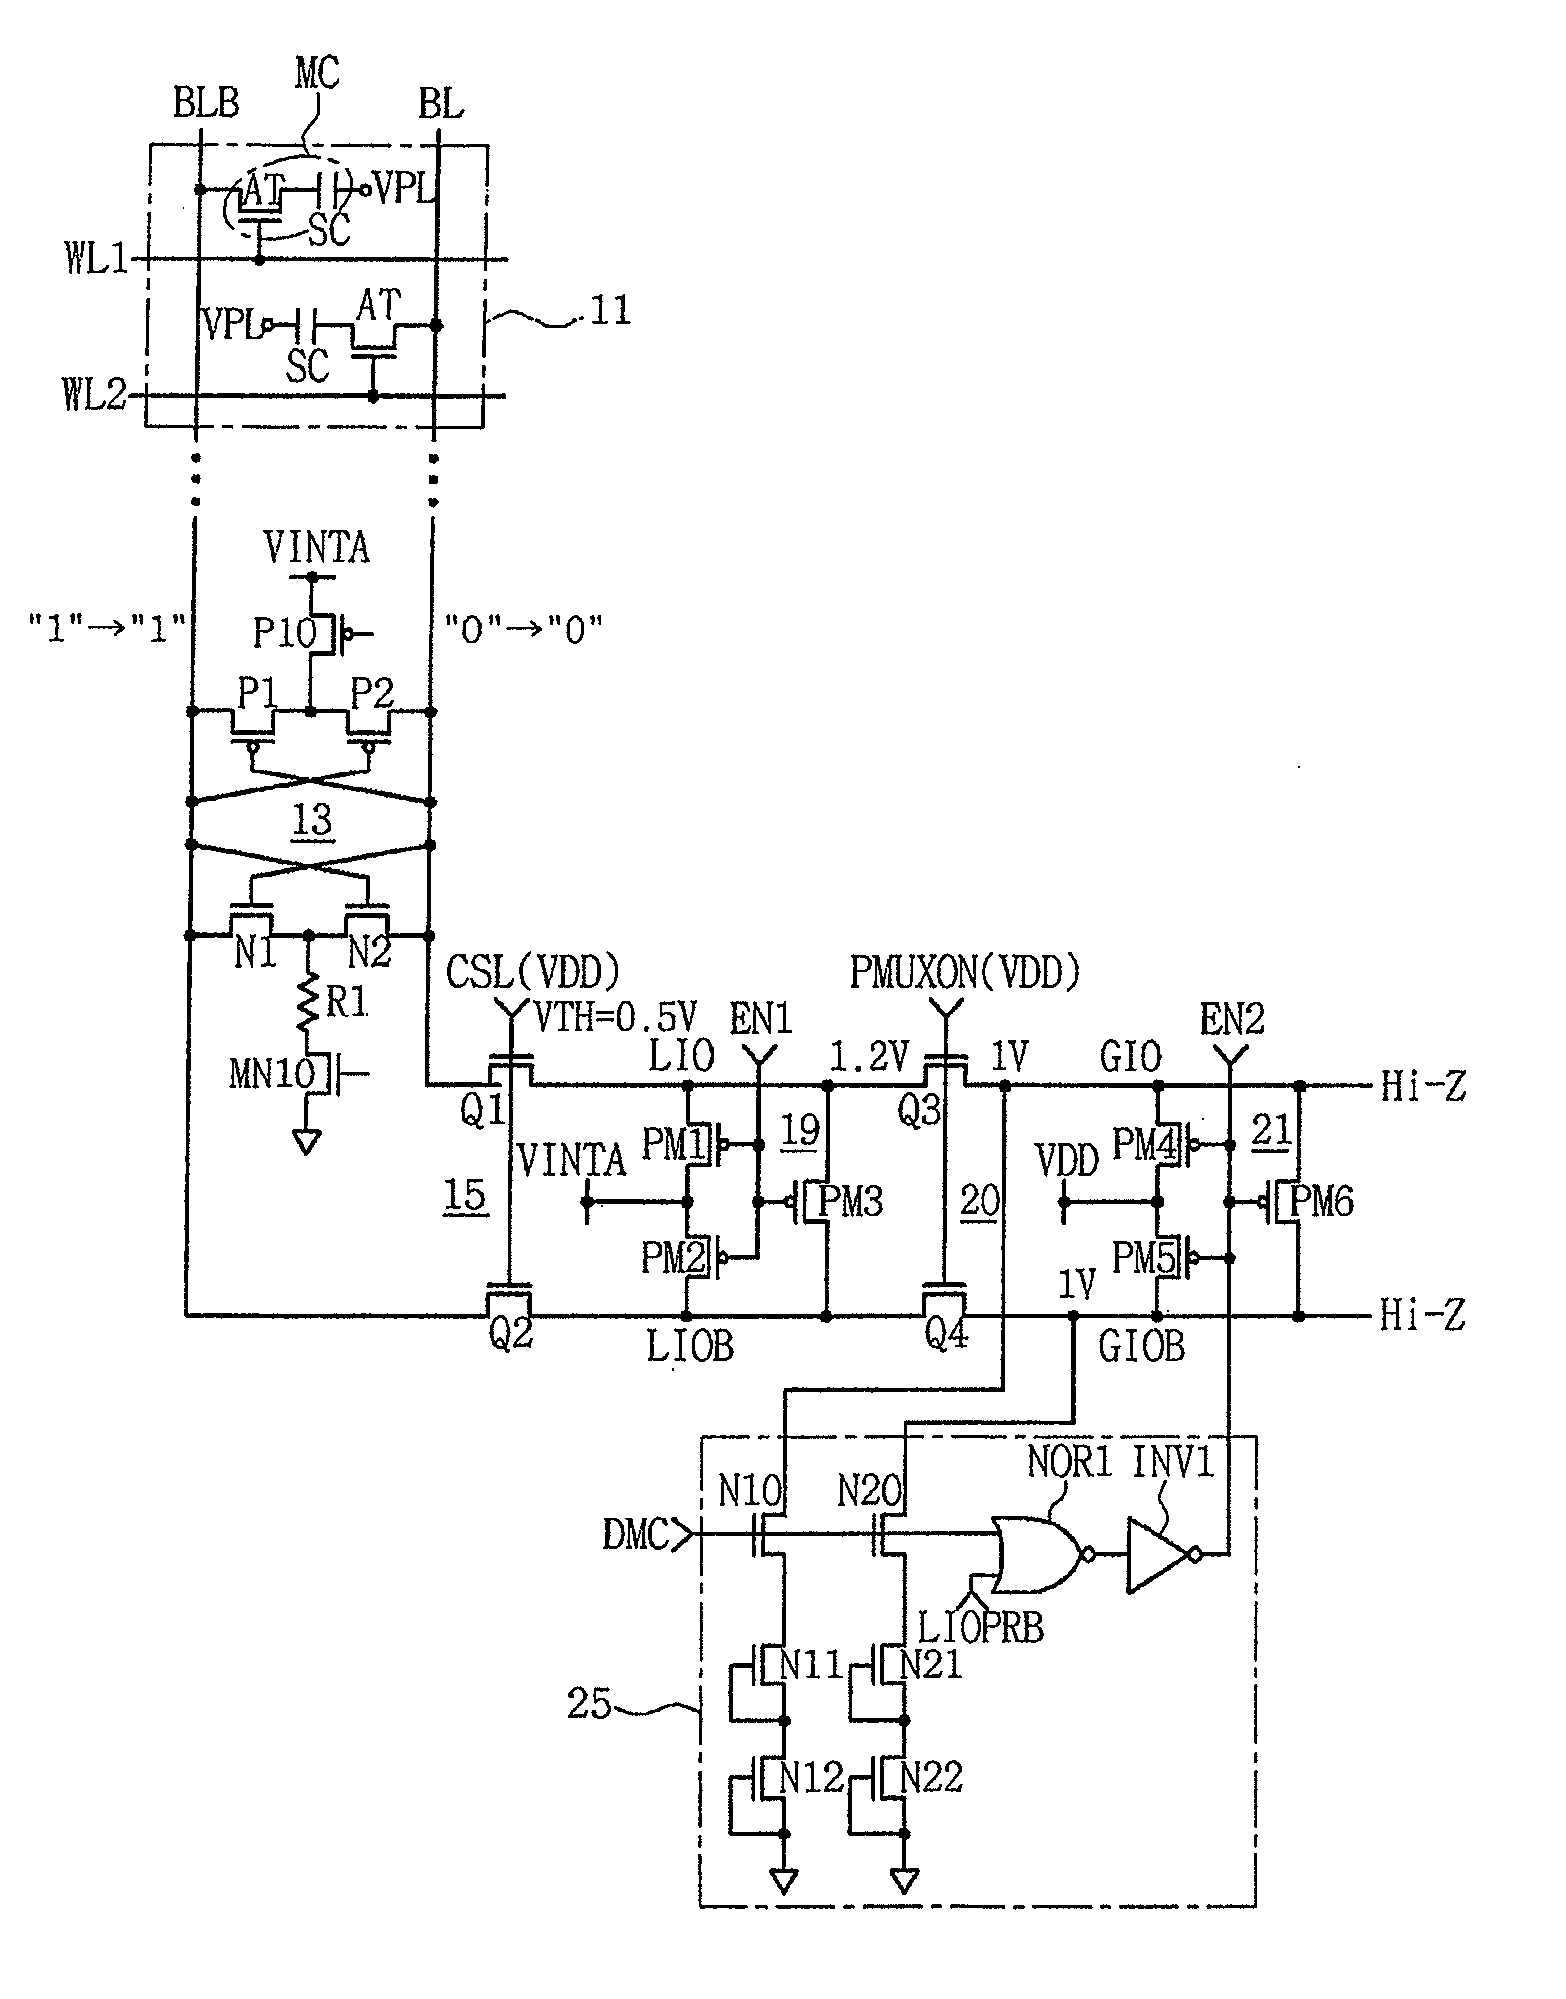 Semiconductor memory device having a discharge path generator for global I/O lines